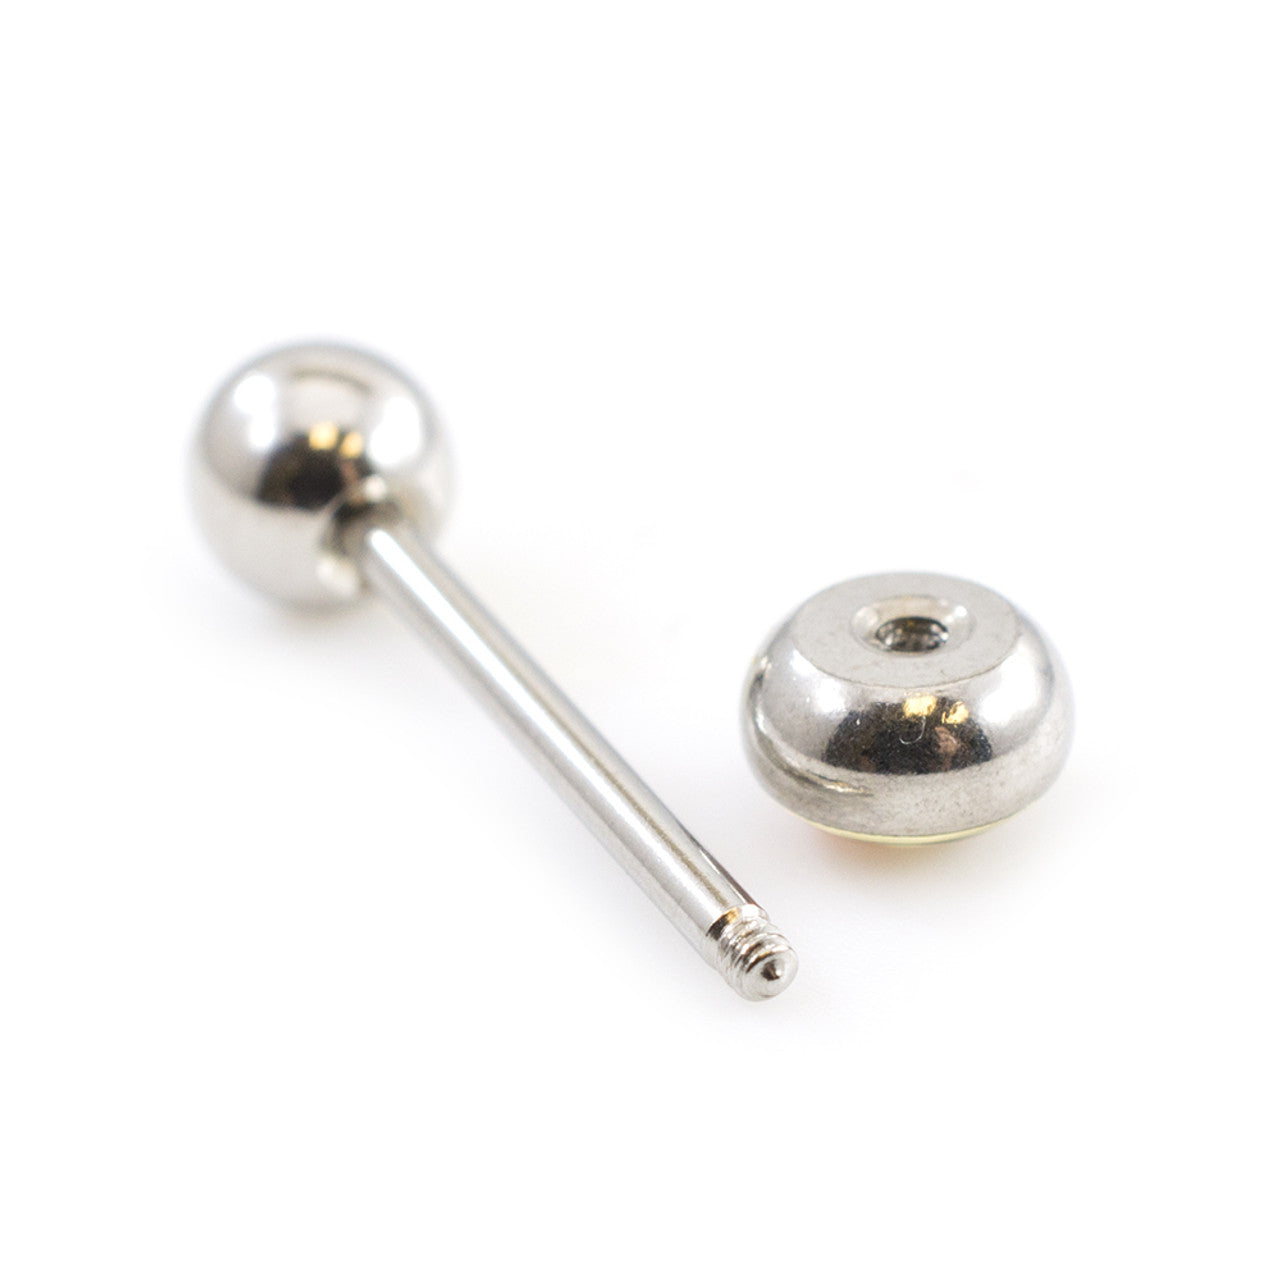 Surgical Steel Tongue Ring Straight Barbell 14 Gauge Che Guevara Logo